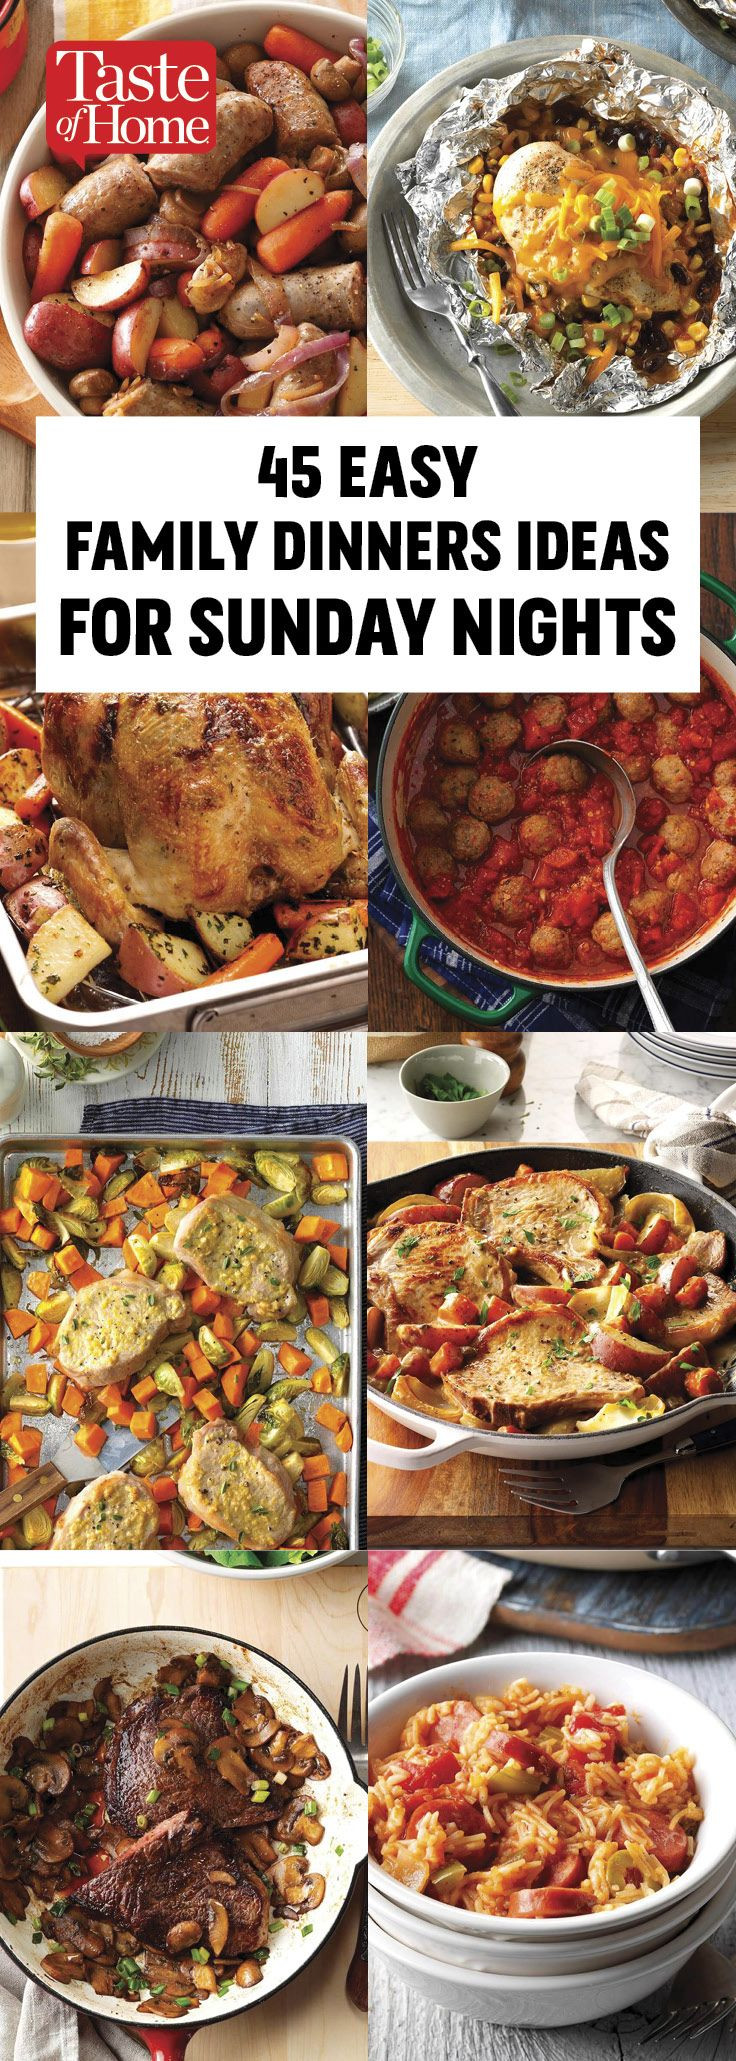 Sunday Family Dinner Ideas
 55 Simple Sunday Suppers